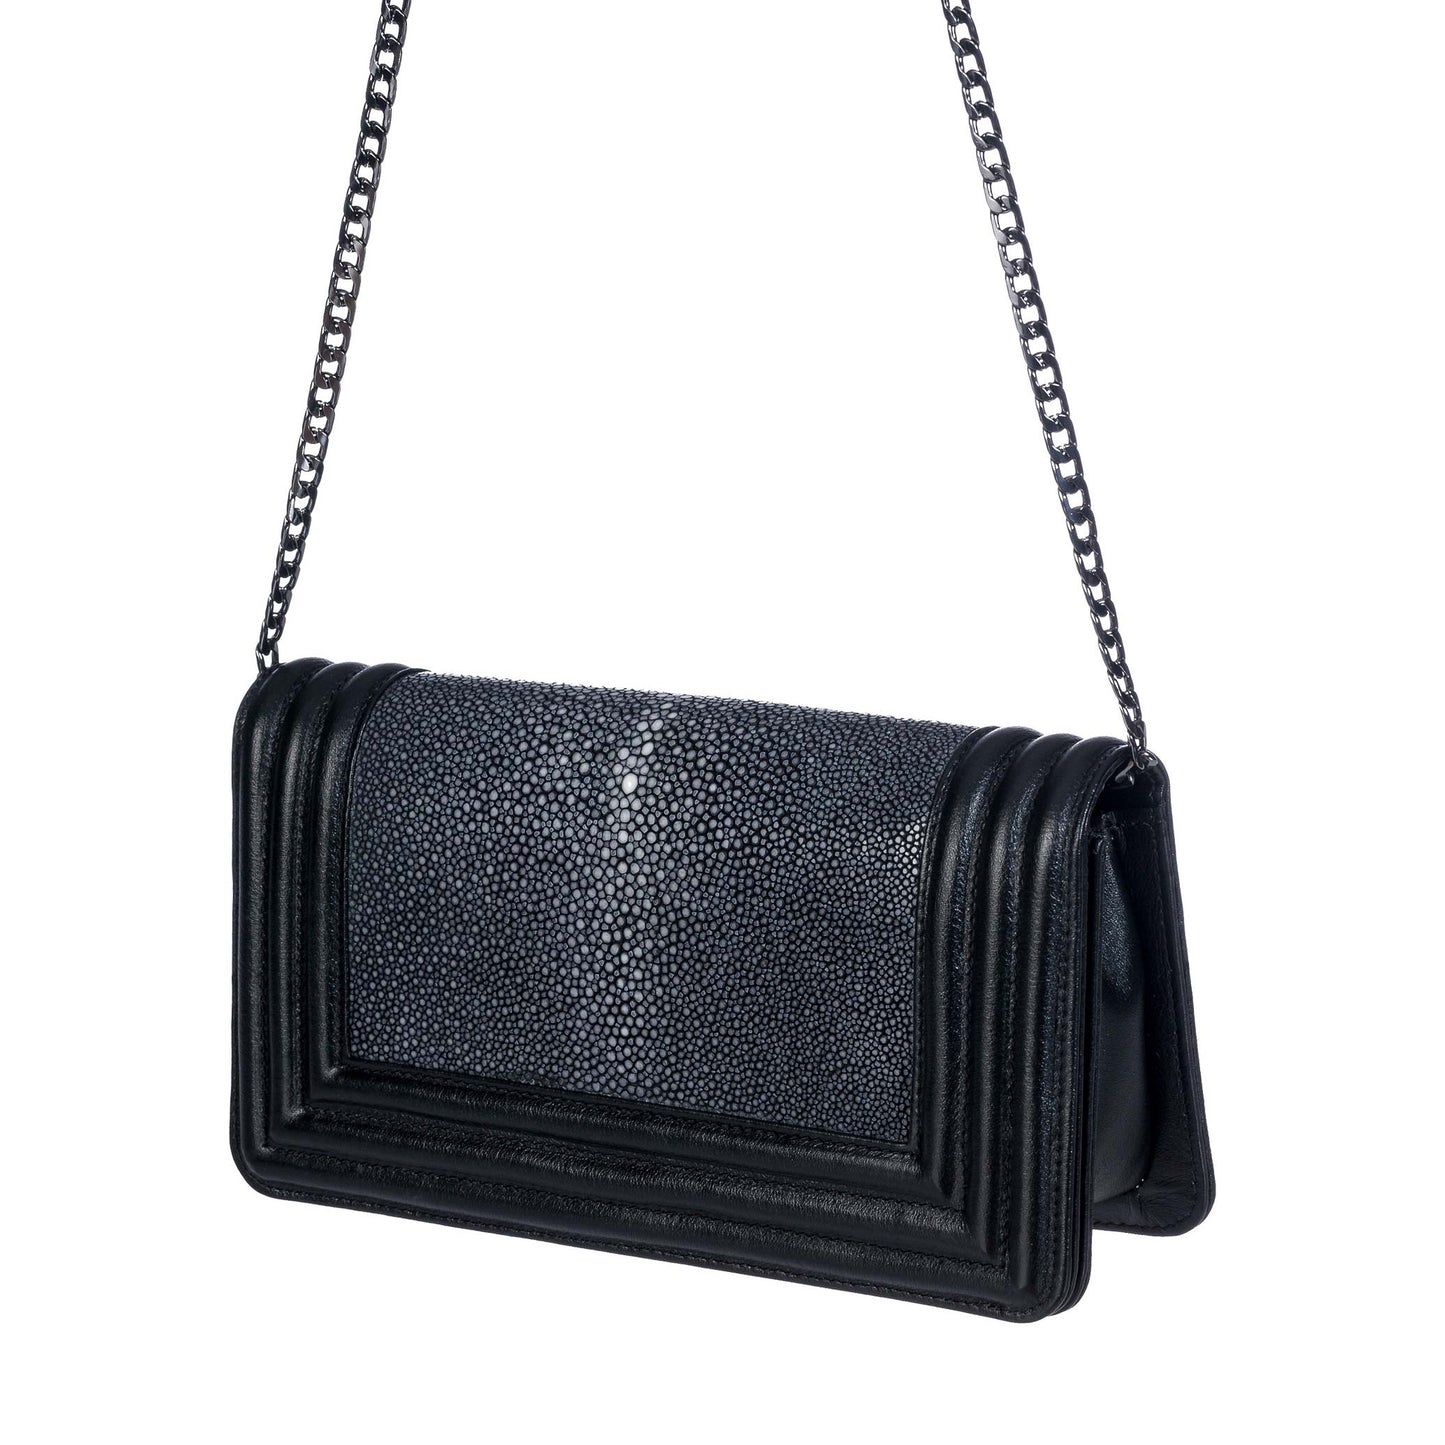 Black Stingray and Leather Clutch